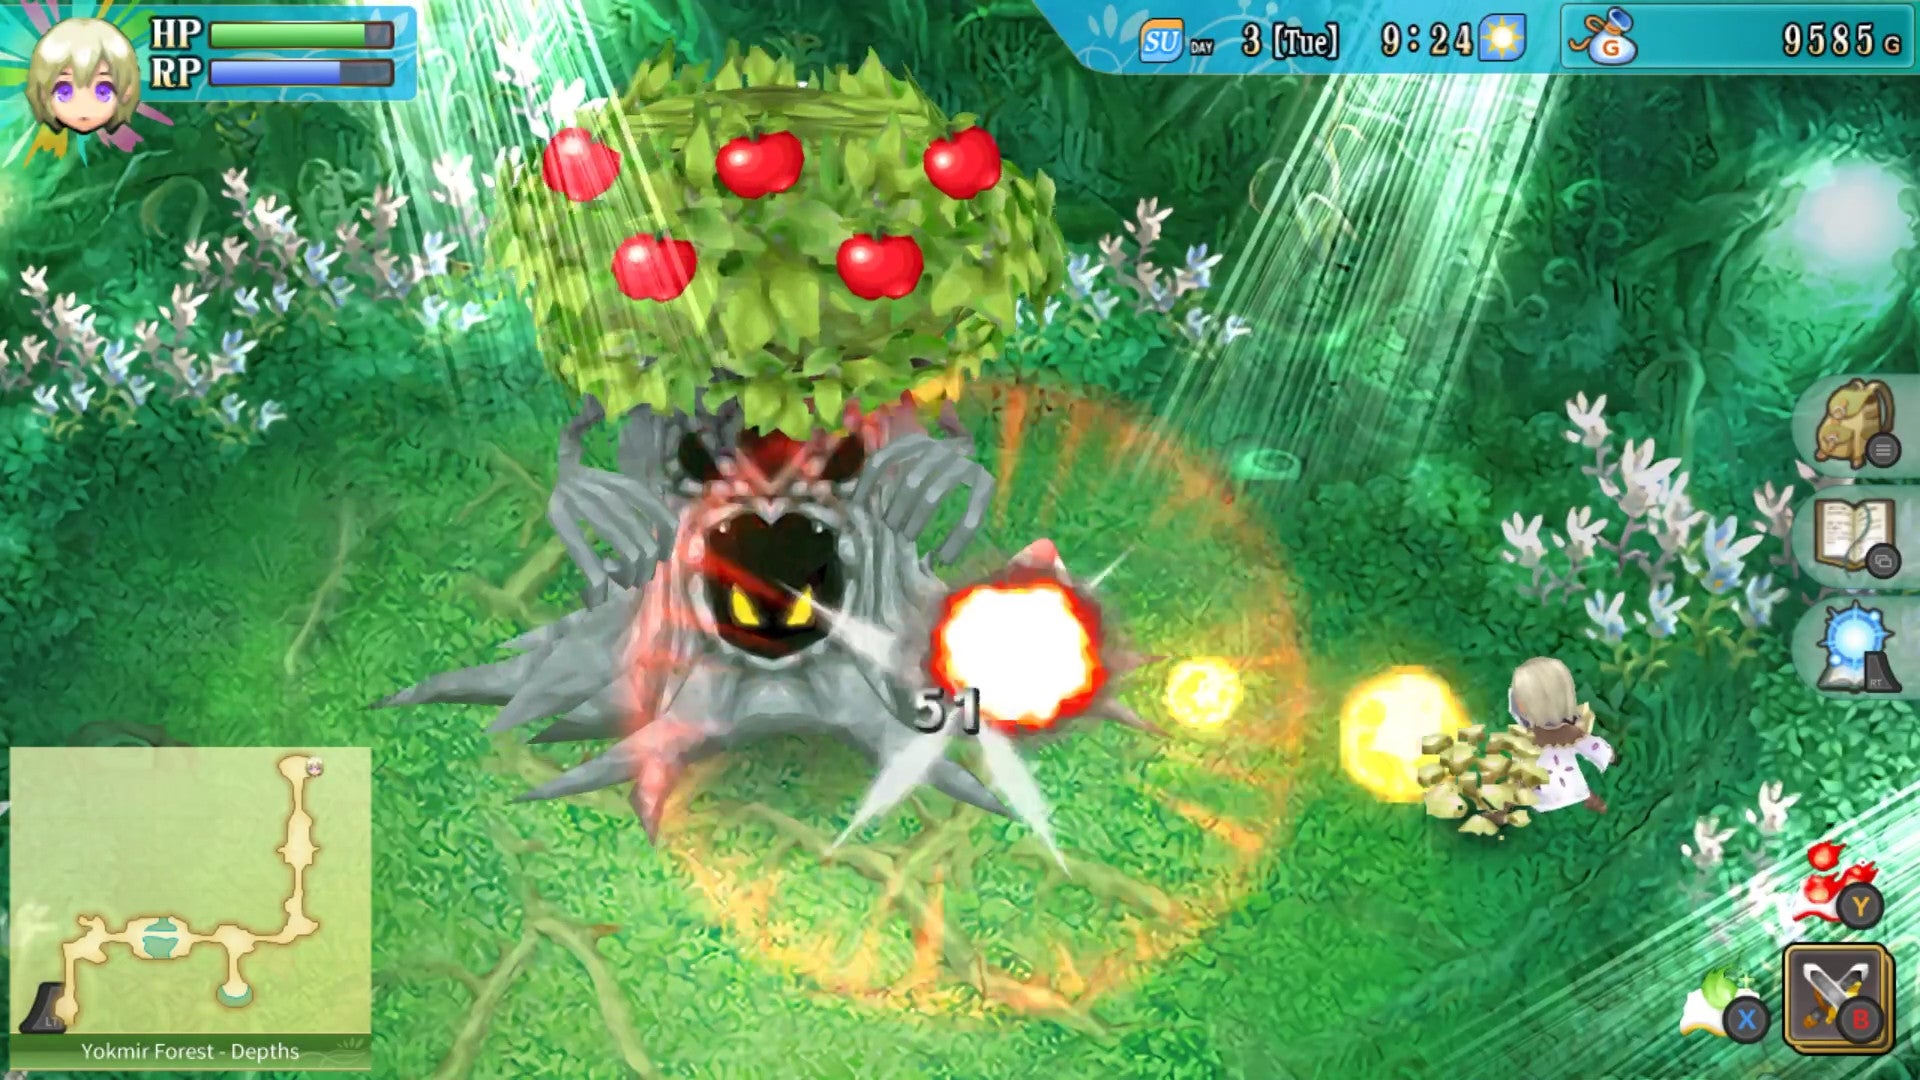 A screenshot of Rune Factory 4 Special showing the player in a fight with a big angry tree which has grown some lovely red apples.